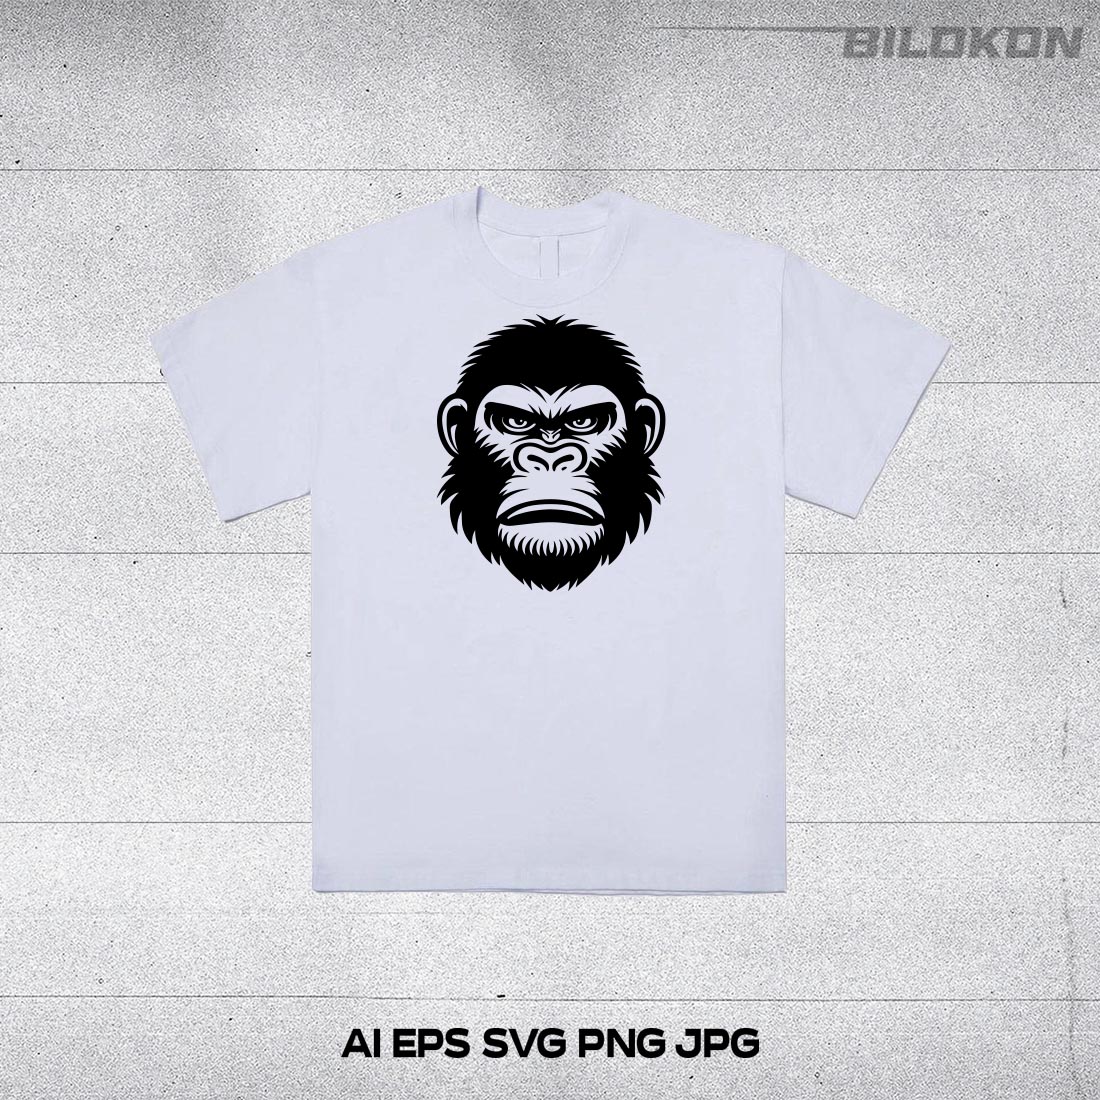 White t - shirt with a gorilla face on it.